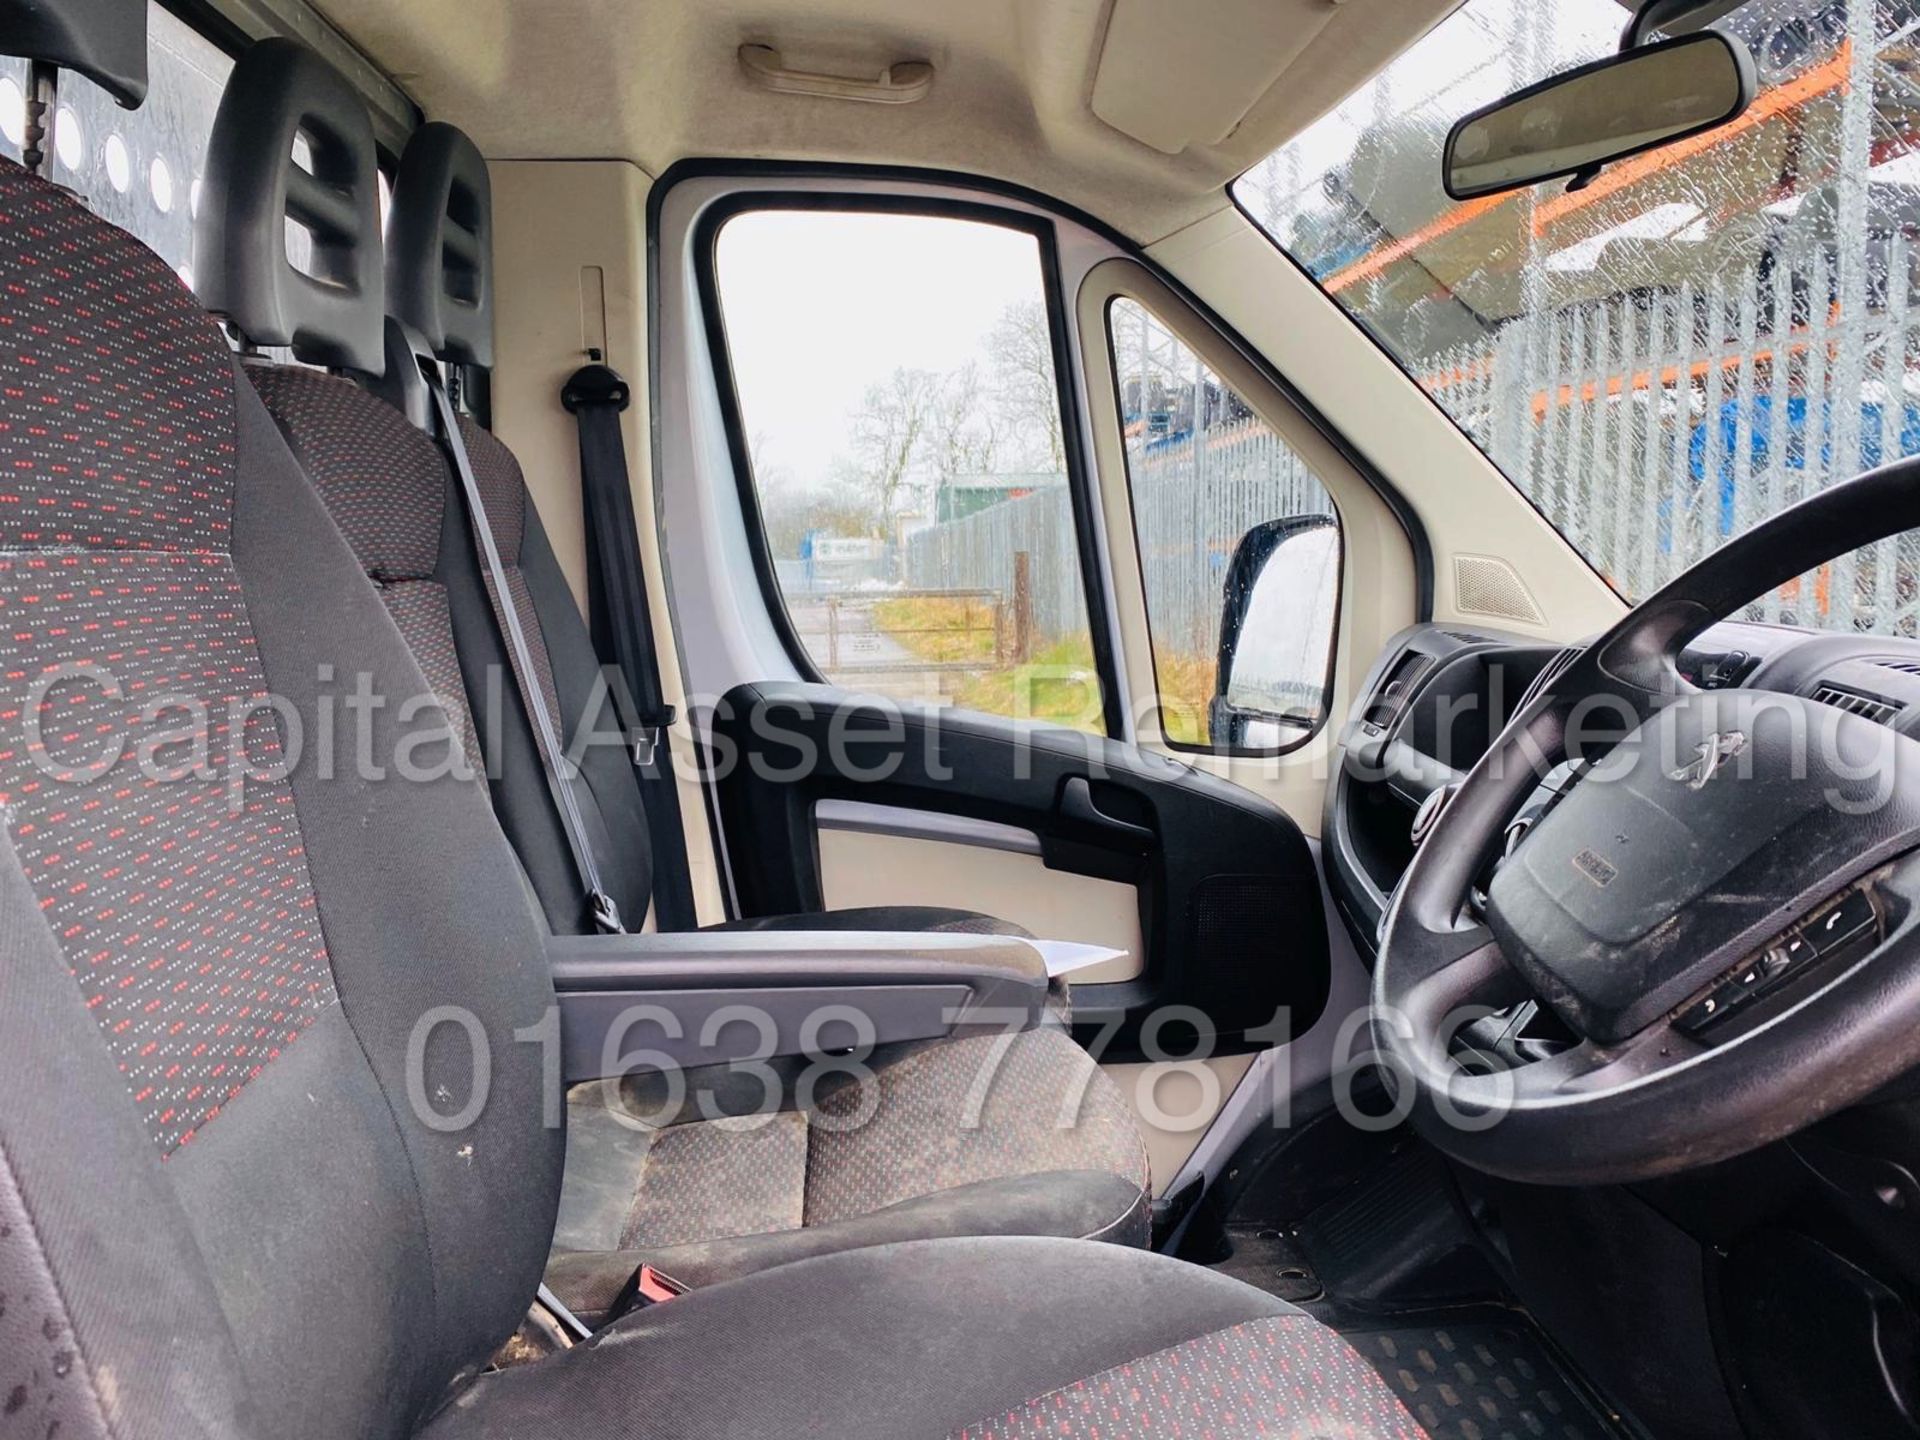 (On Sale) PEUGEOT BOXER 335 *LWB - ALLOY DROPSIDE TRUCK* (65 REG) '2.2 HDI - 6 SPEED' (3500 KG) - Image 23 of 32